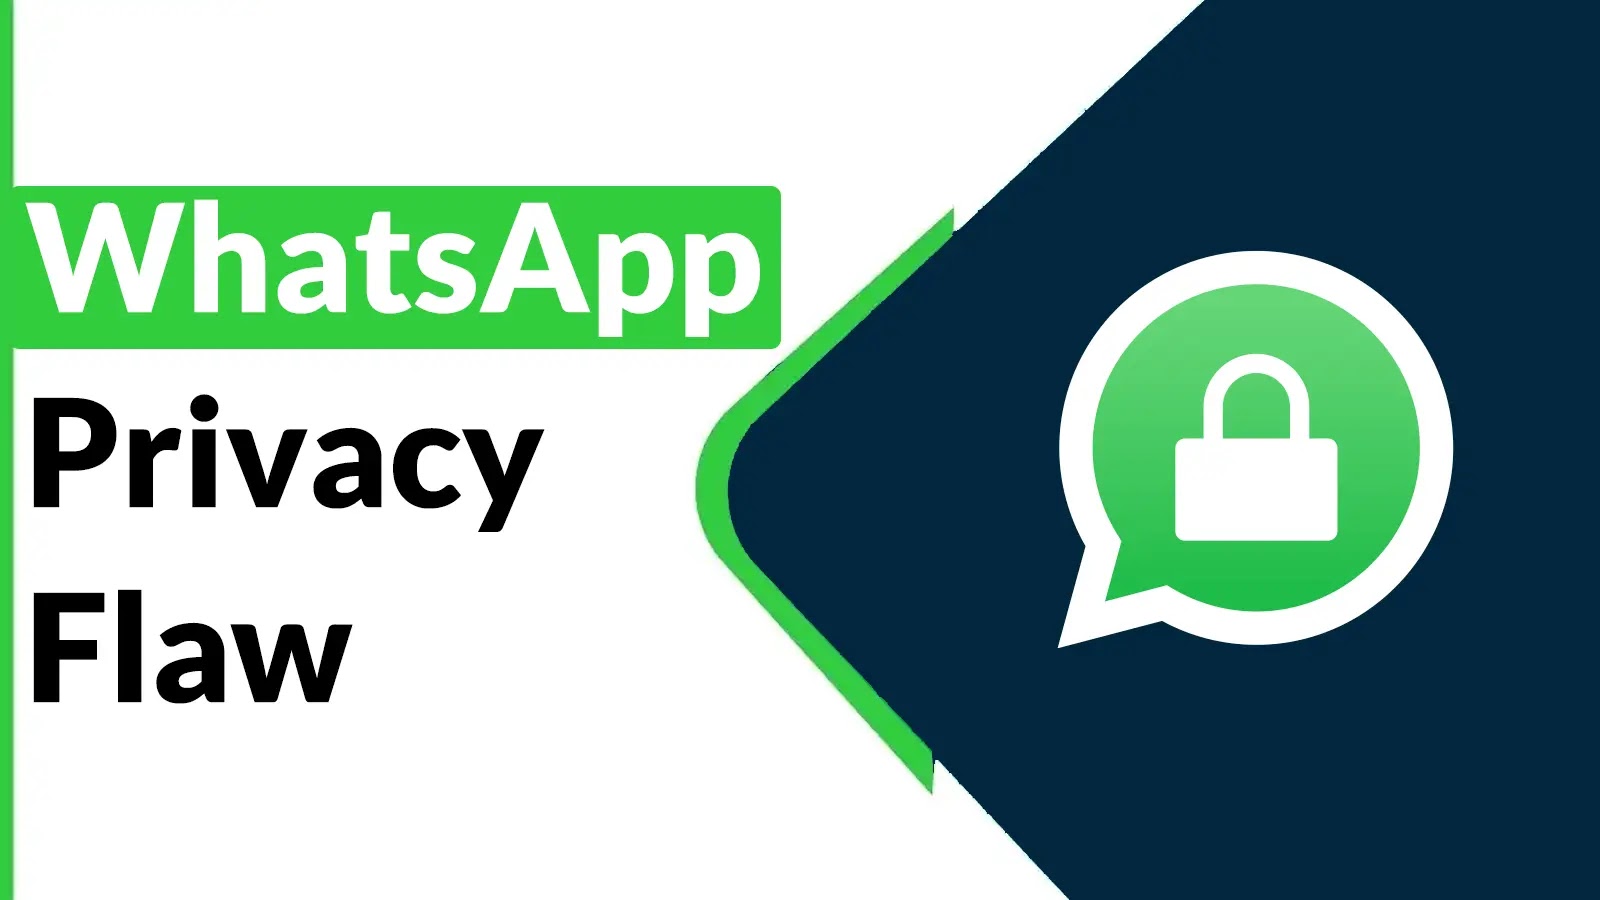 WhatsApp Privacy Flaw Devices Information to Any Other User